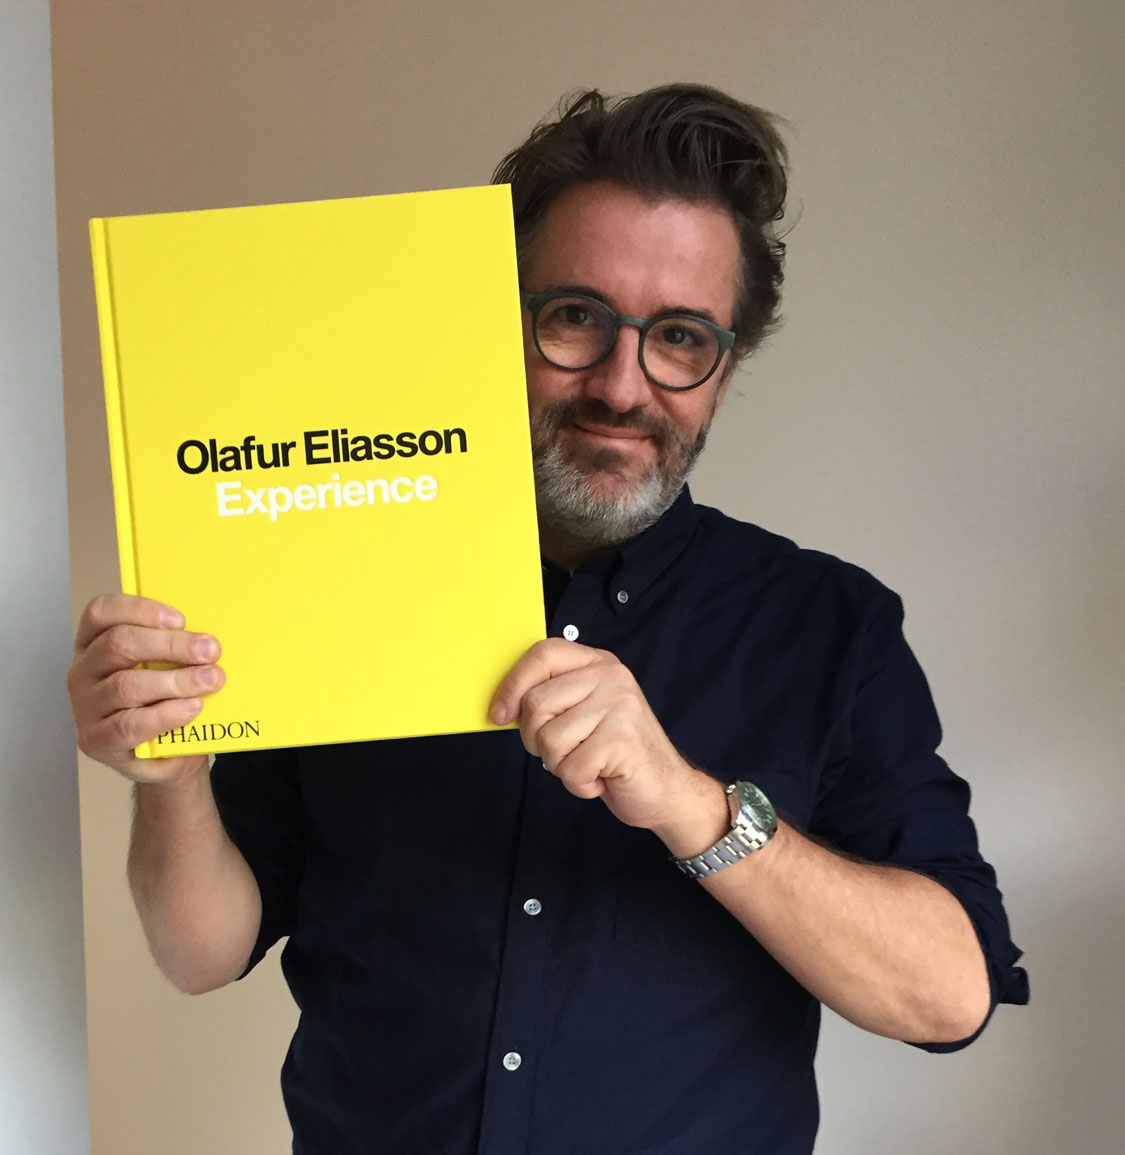 Olafur Eliasson on social media, Experience and his next show